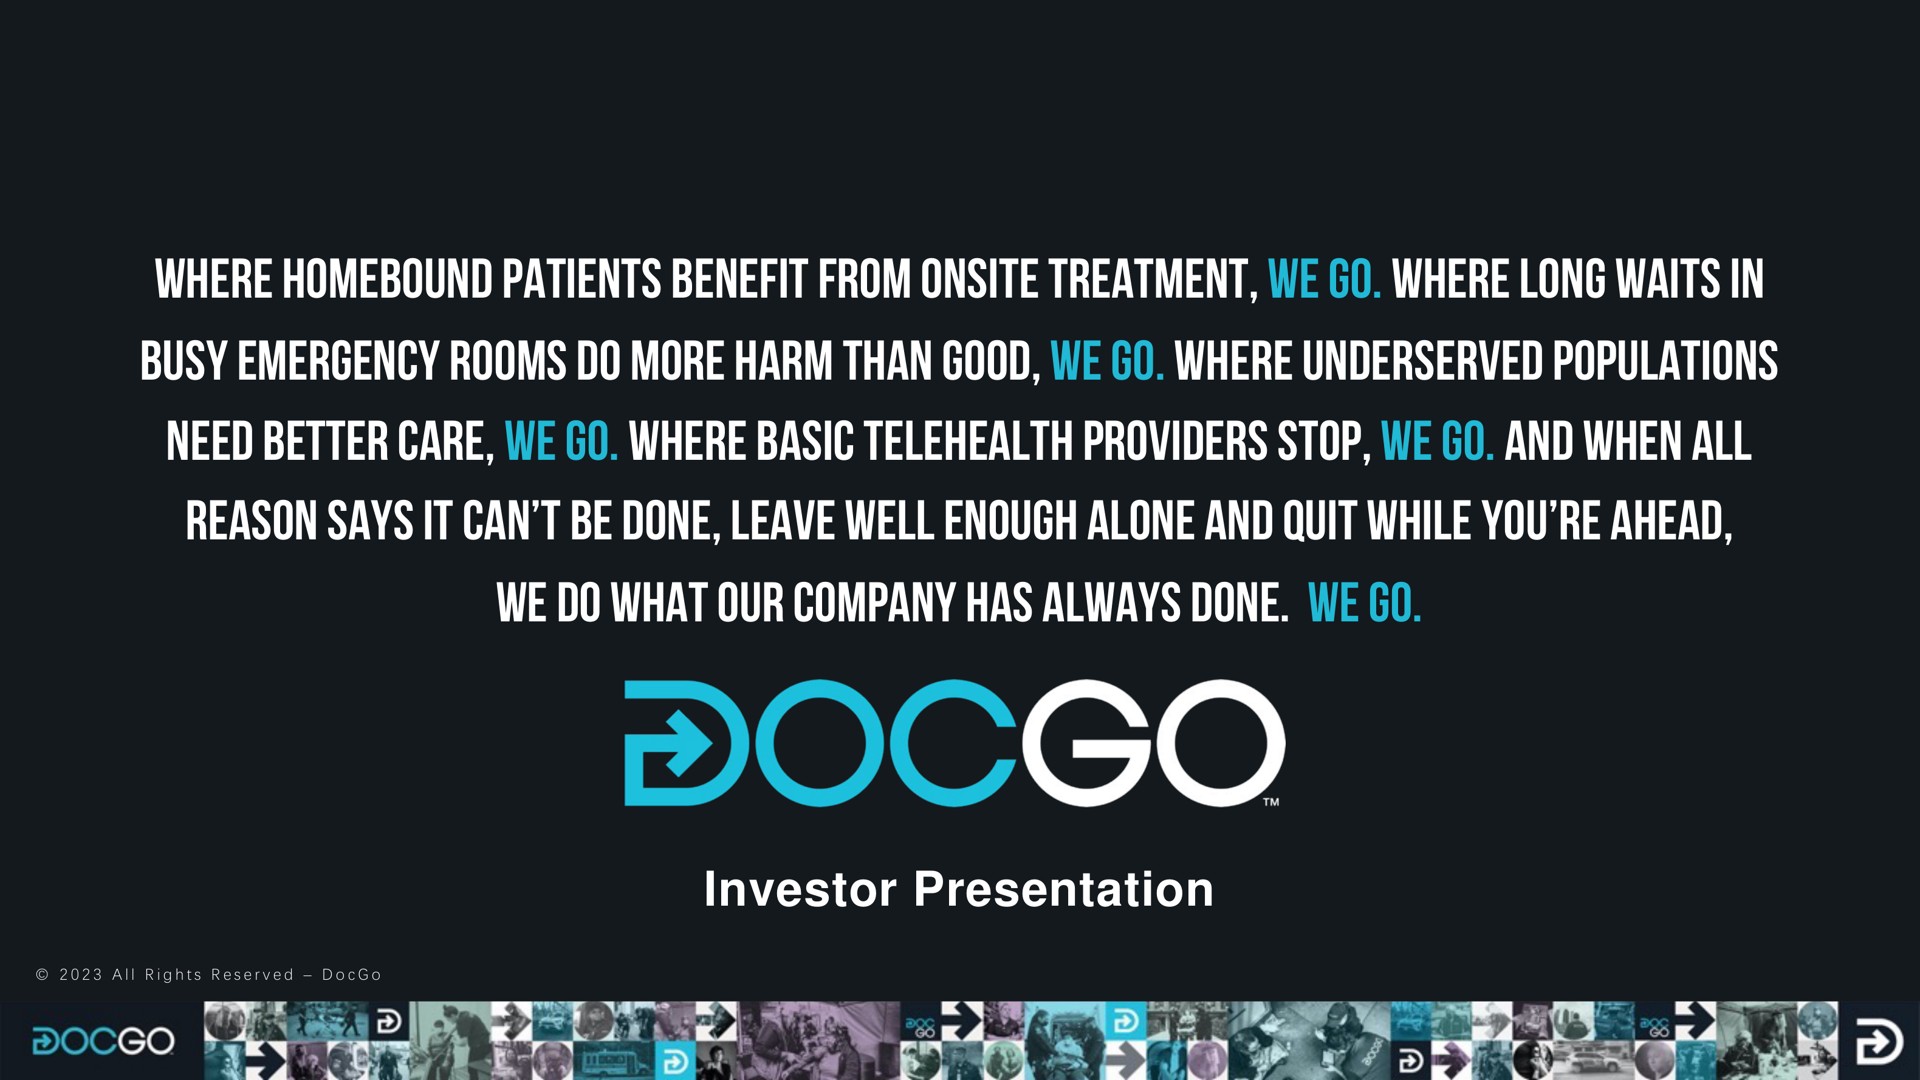 where homebound patients benefit from treatment we go where long waits in busy emergency rooms do more harm than good we go where populations need better care we go where basic providers stop we go and when all reason says it can be done leave well enough alone and quit while you ahead we do what our company has always done we go investor presentation sele | DocGo